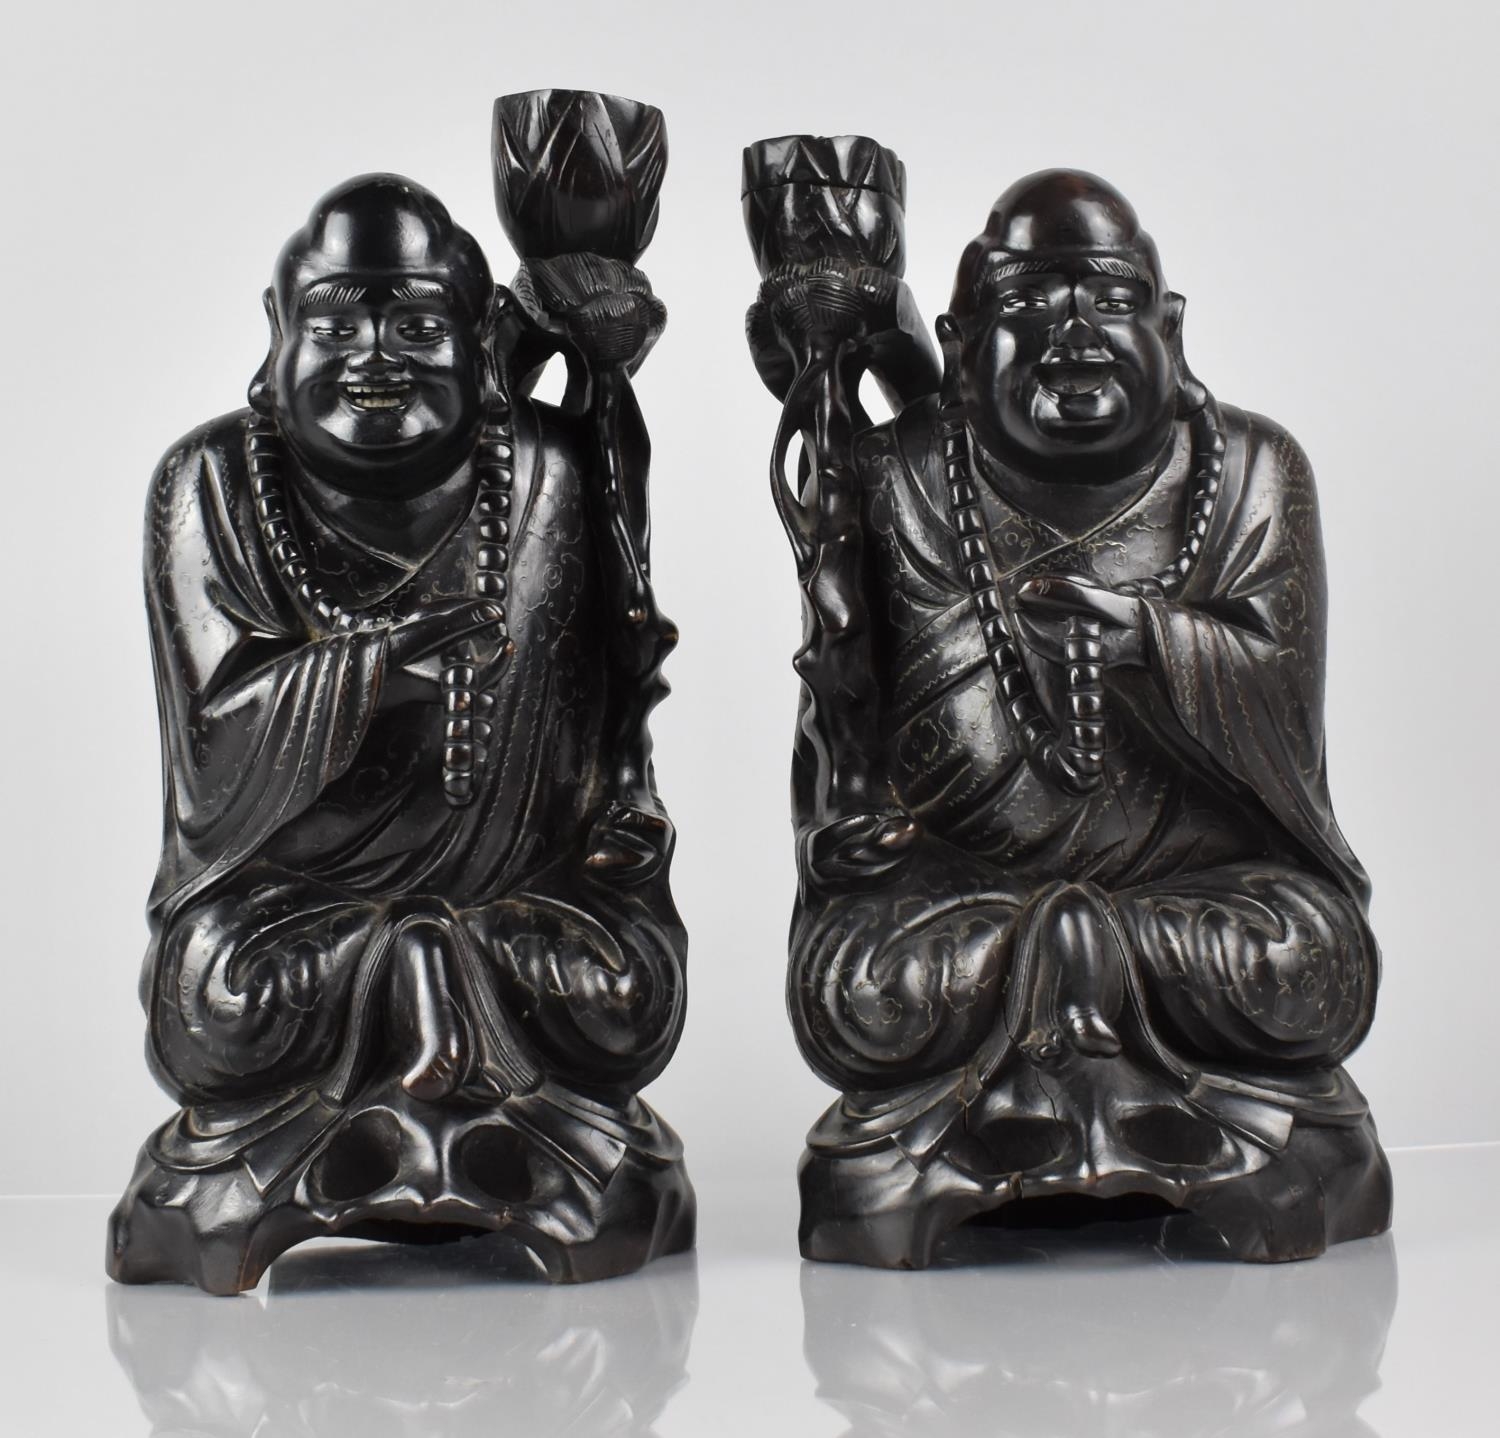 A Pair of Late 19th Century Chinese Hardwood Figural Candle Holders in the Form of Chinese Gods/